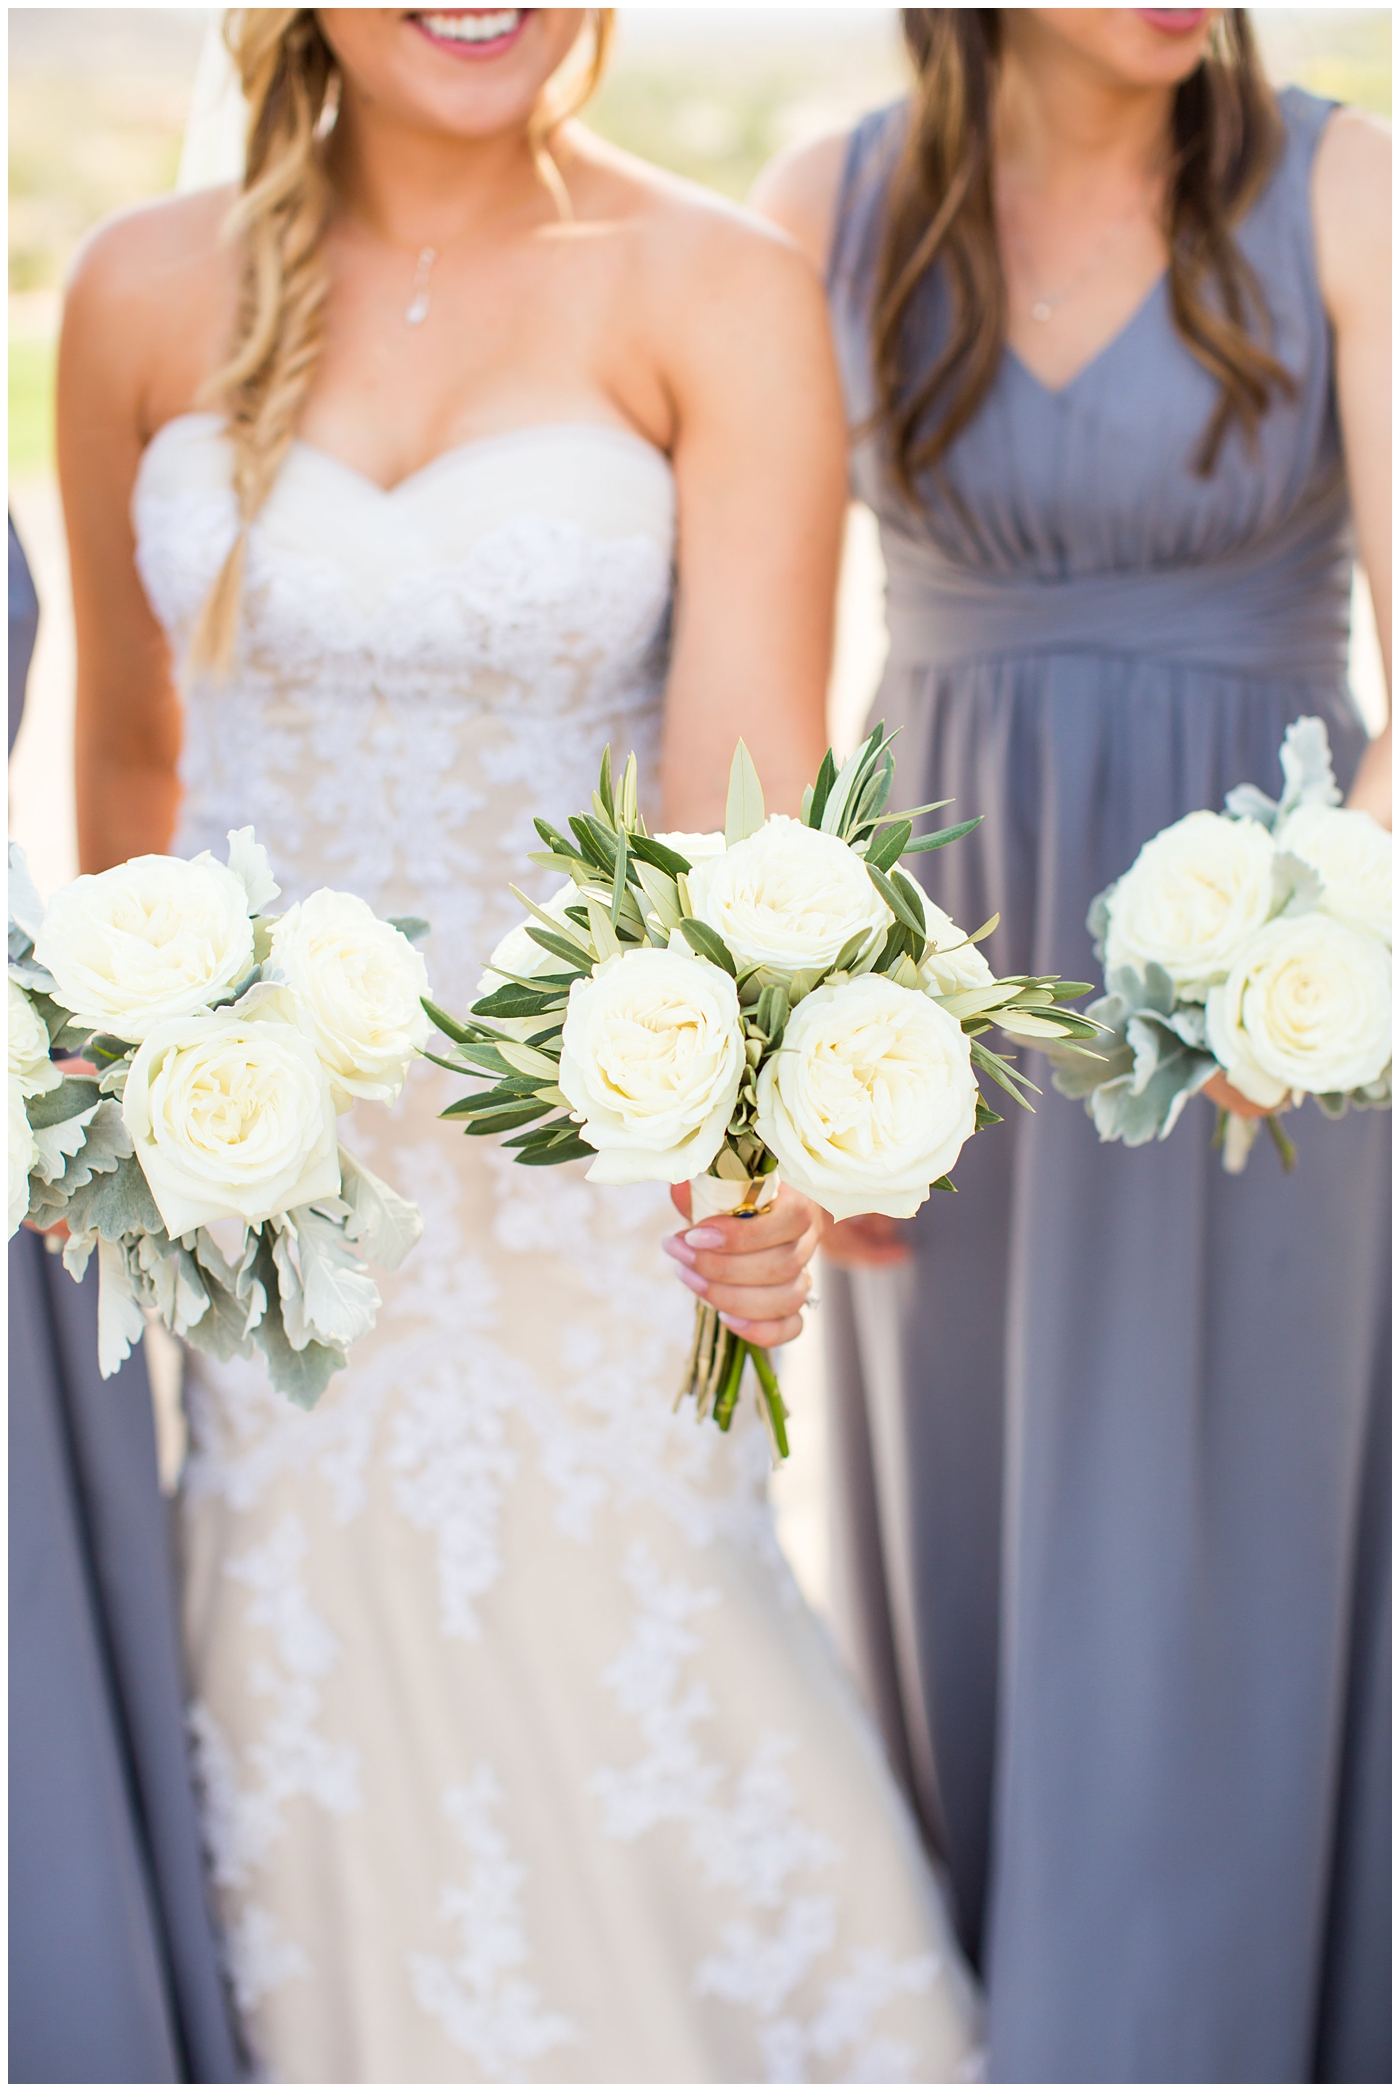 bride with fishtail braid and strapless dress with white rose and greenery bouquet with bridesmaids in slate gray long dresses on wedding day bridal party portrait